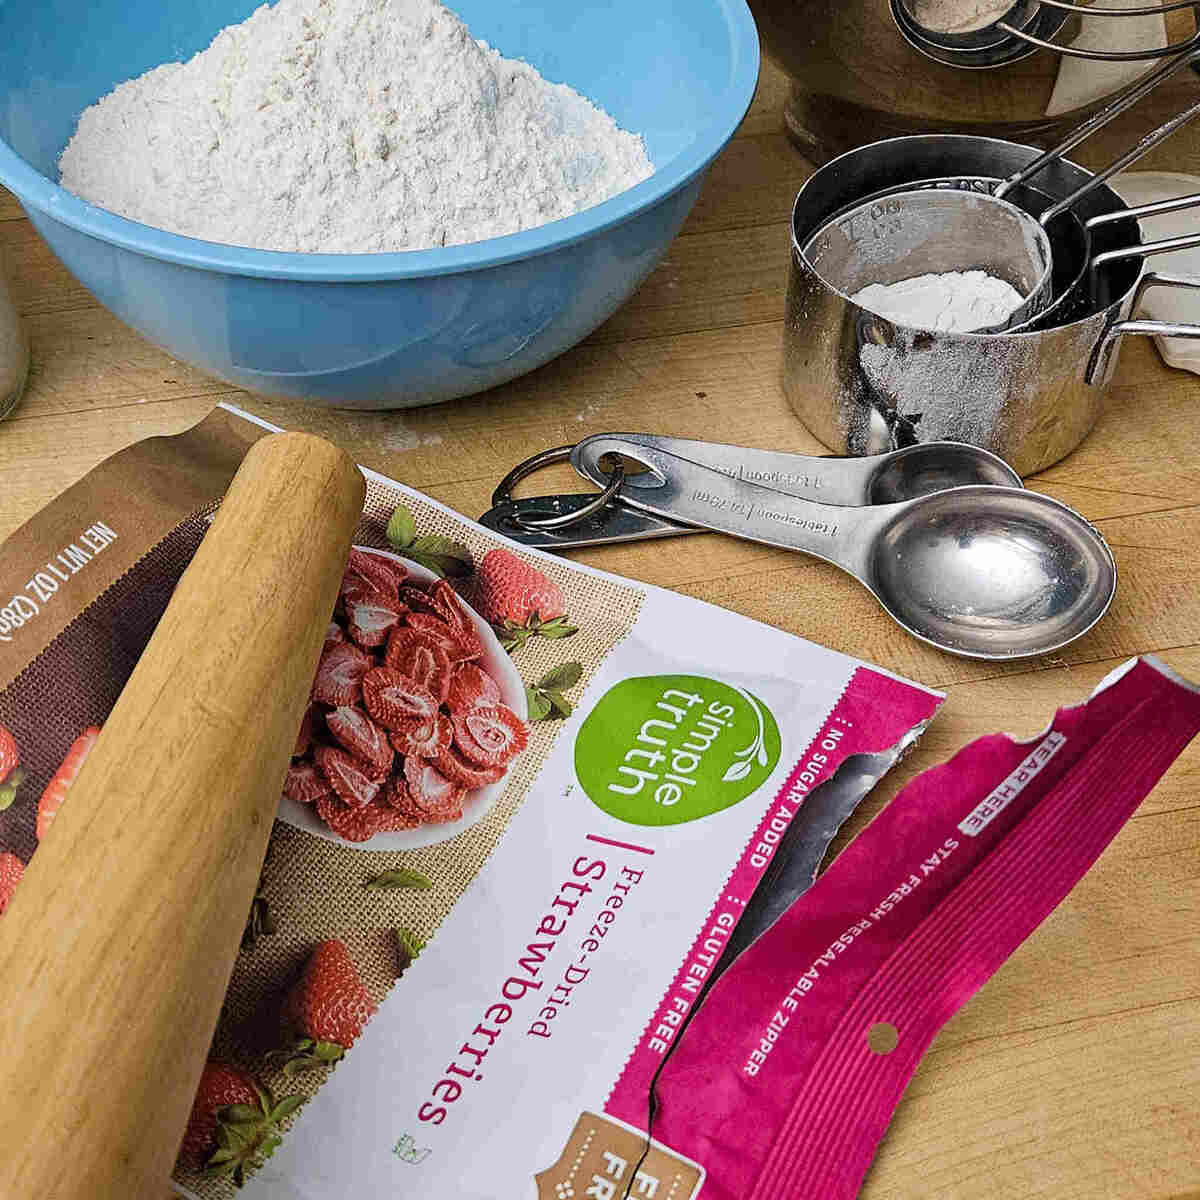 smashing the freeze dried strawberries in the bag with a rolling pin for the best strawberry shortbread sandwich cookie recipe